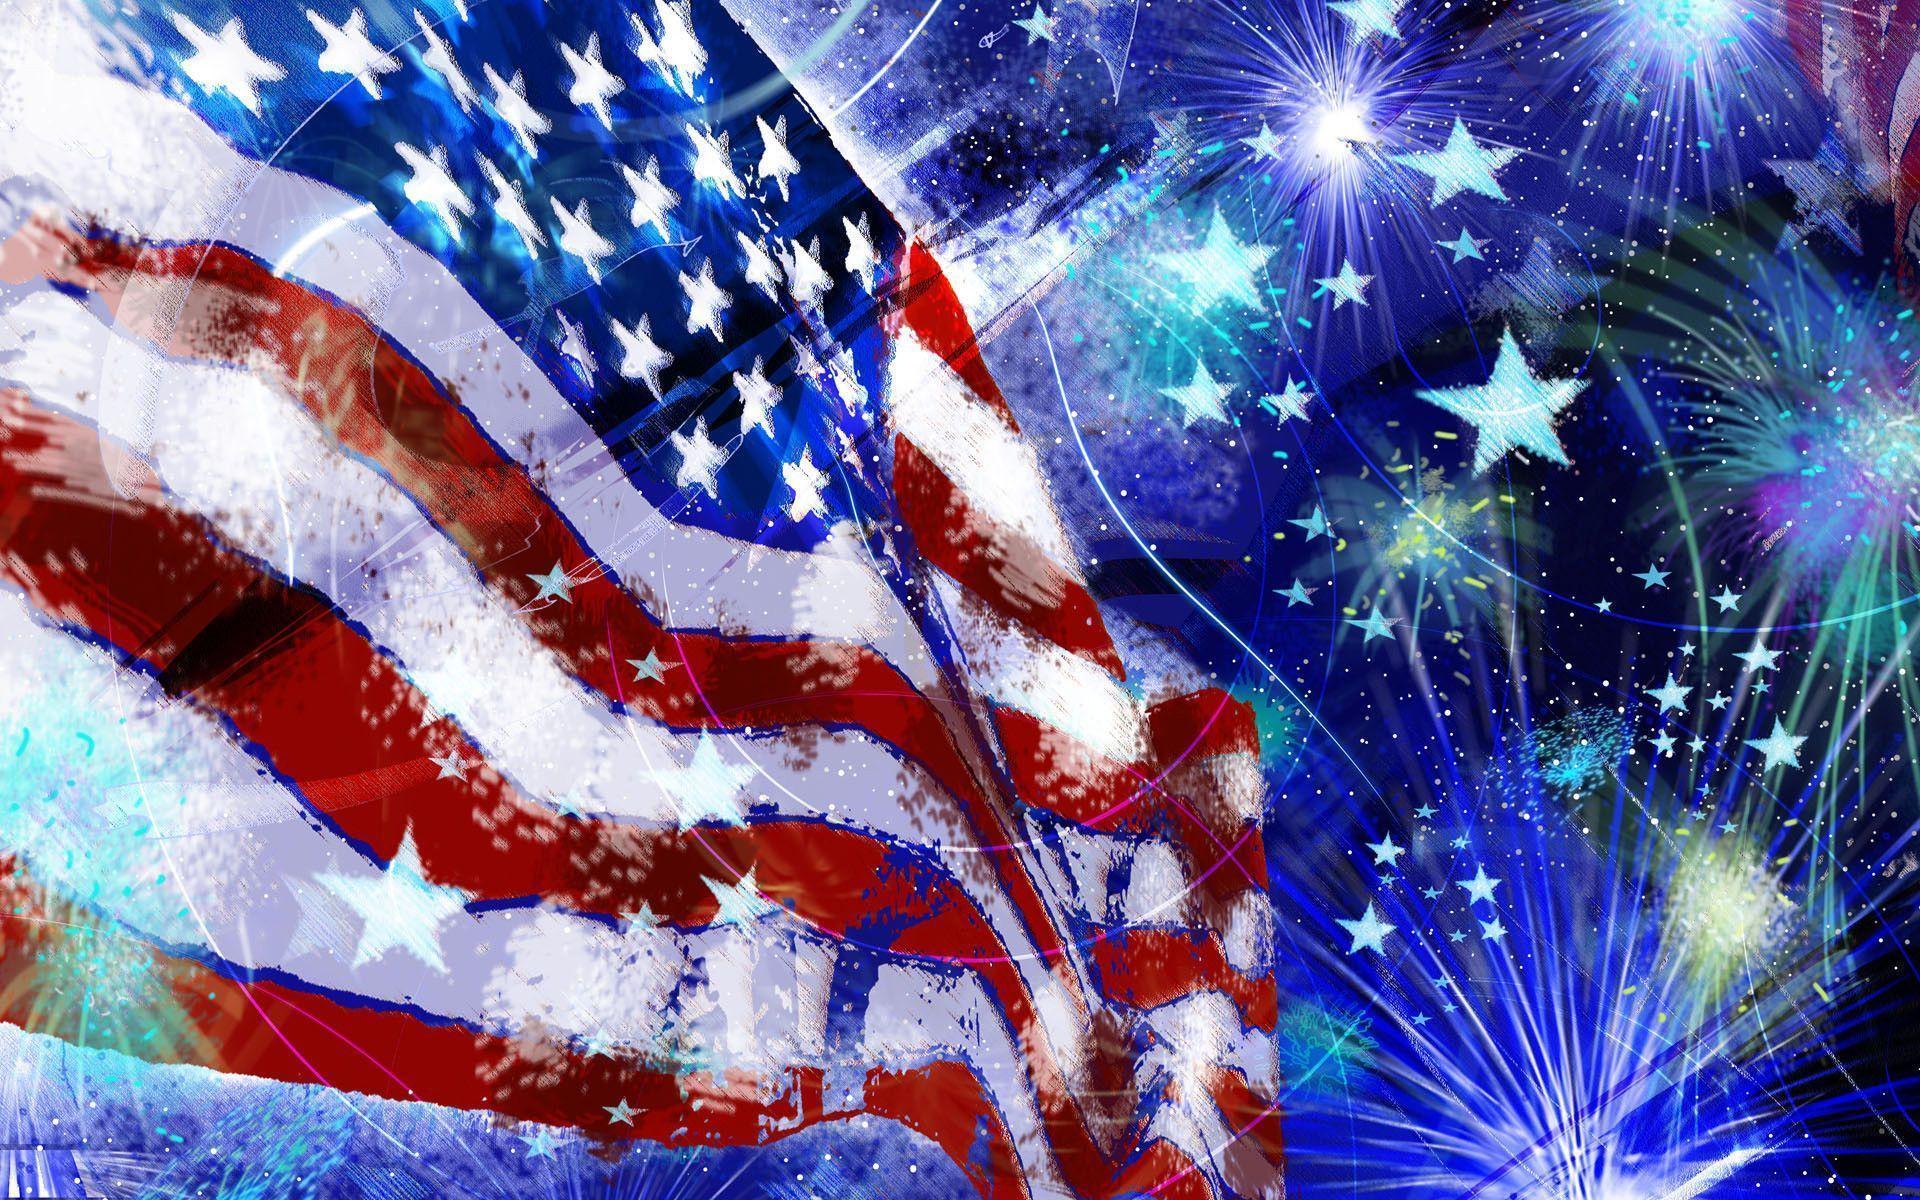 USA Independence Day of Happy 4th July 4th july Wallpaper 4th july pics 4th  july Wallpapers of USA 4th july